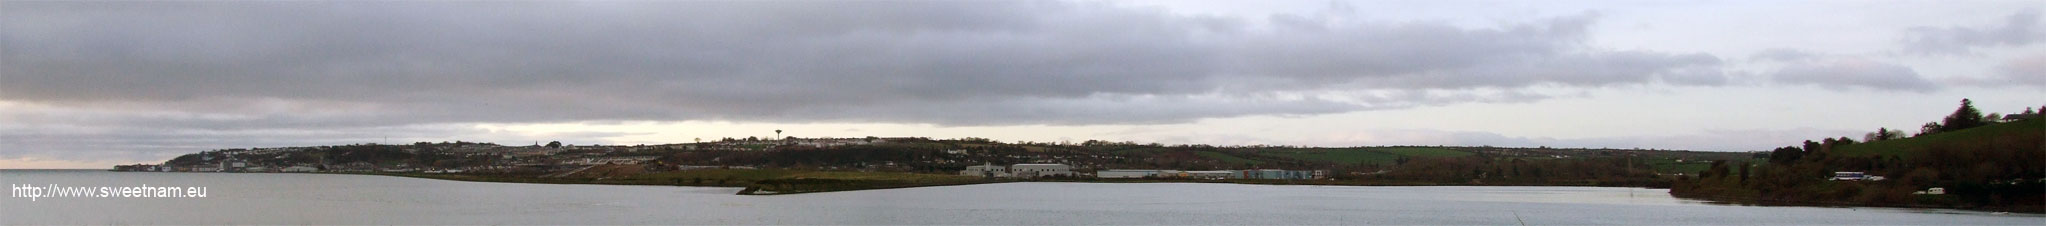 Panoramic photo of Youghal taken from the Waterford side of the Blackwater bridge.